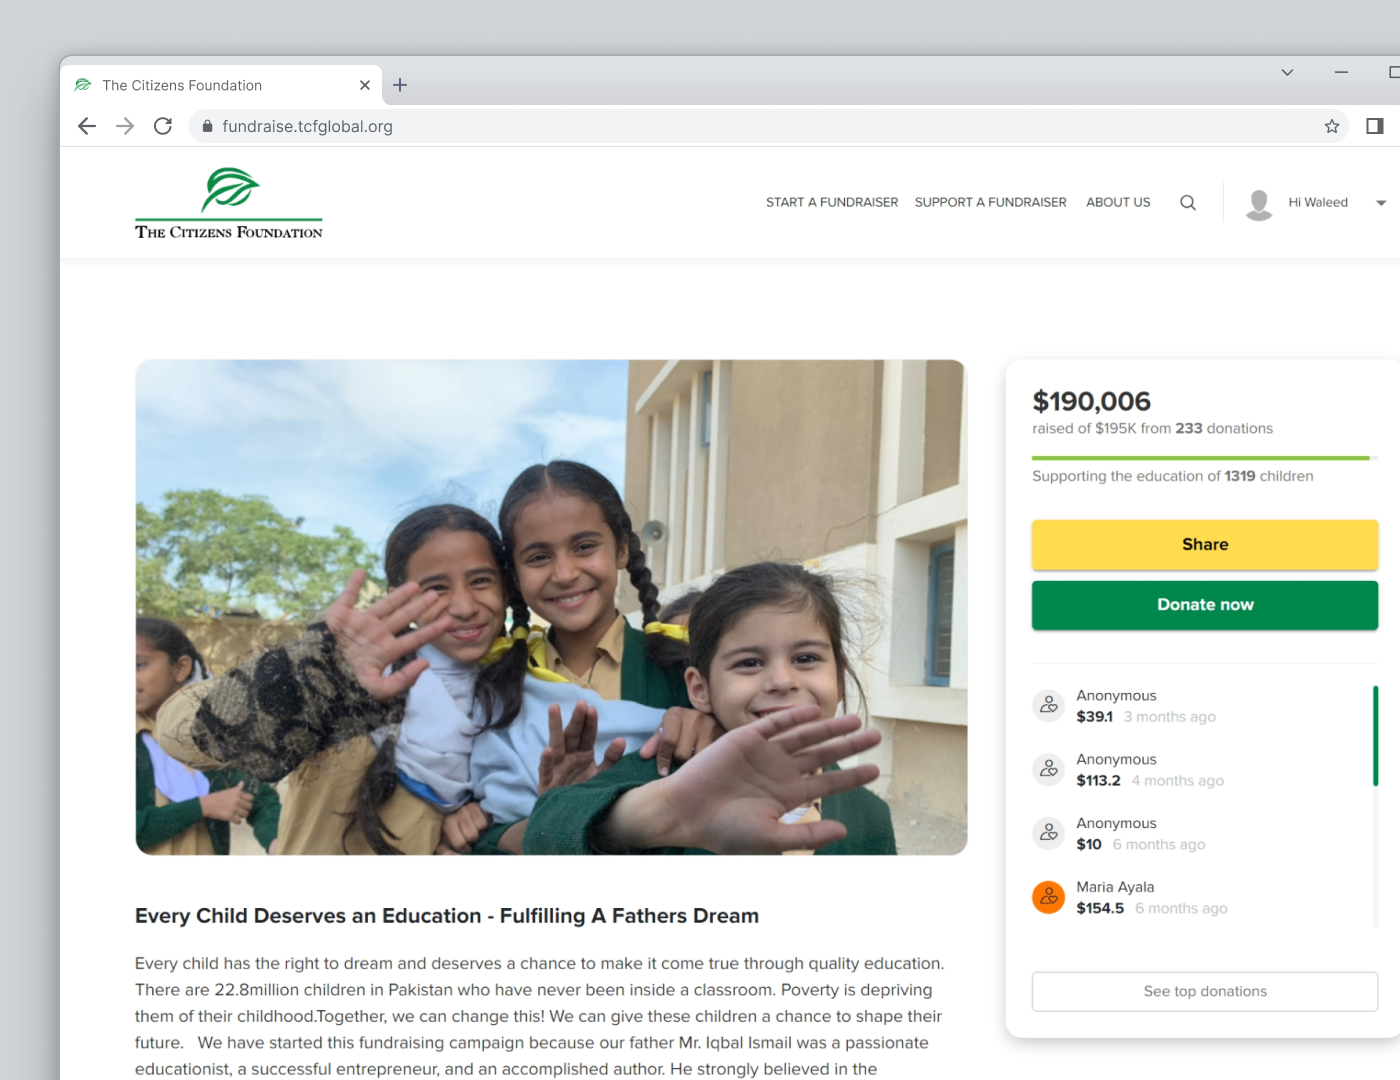 Simplifying International Donations and Enabling P2P Fundraising